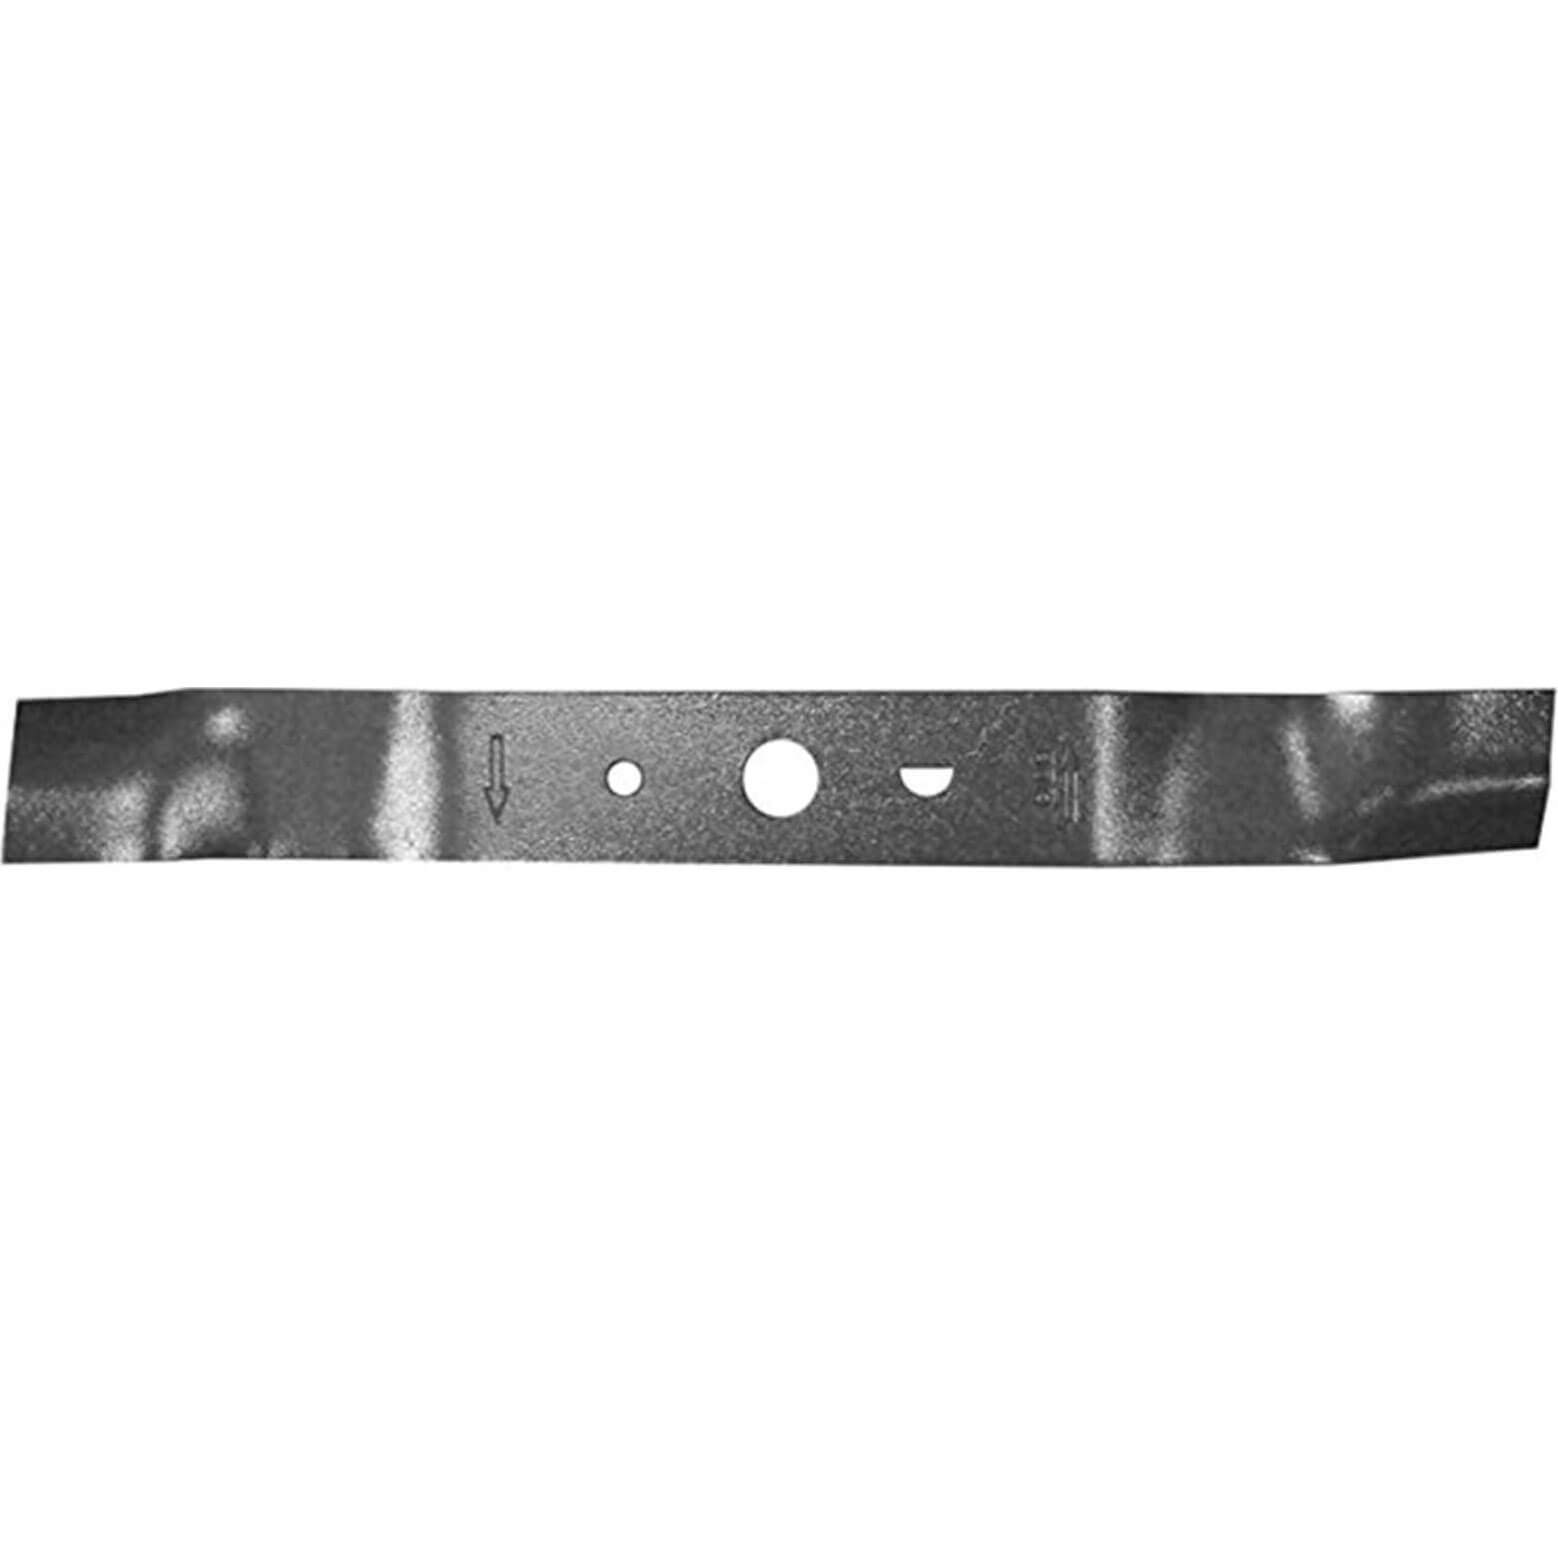 Photo of Greenworks Genuine Lawnmower Blade For G40lm35 Pack Of 1